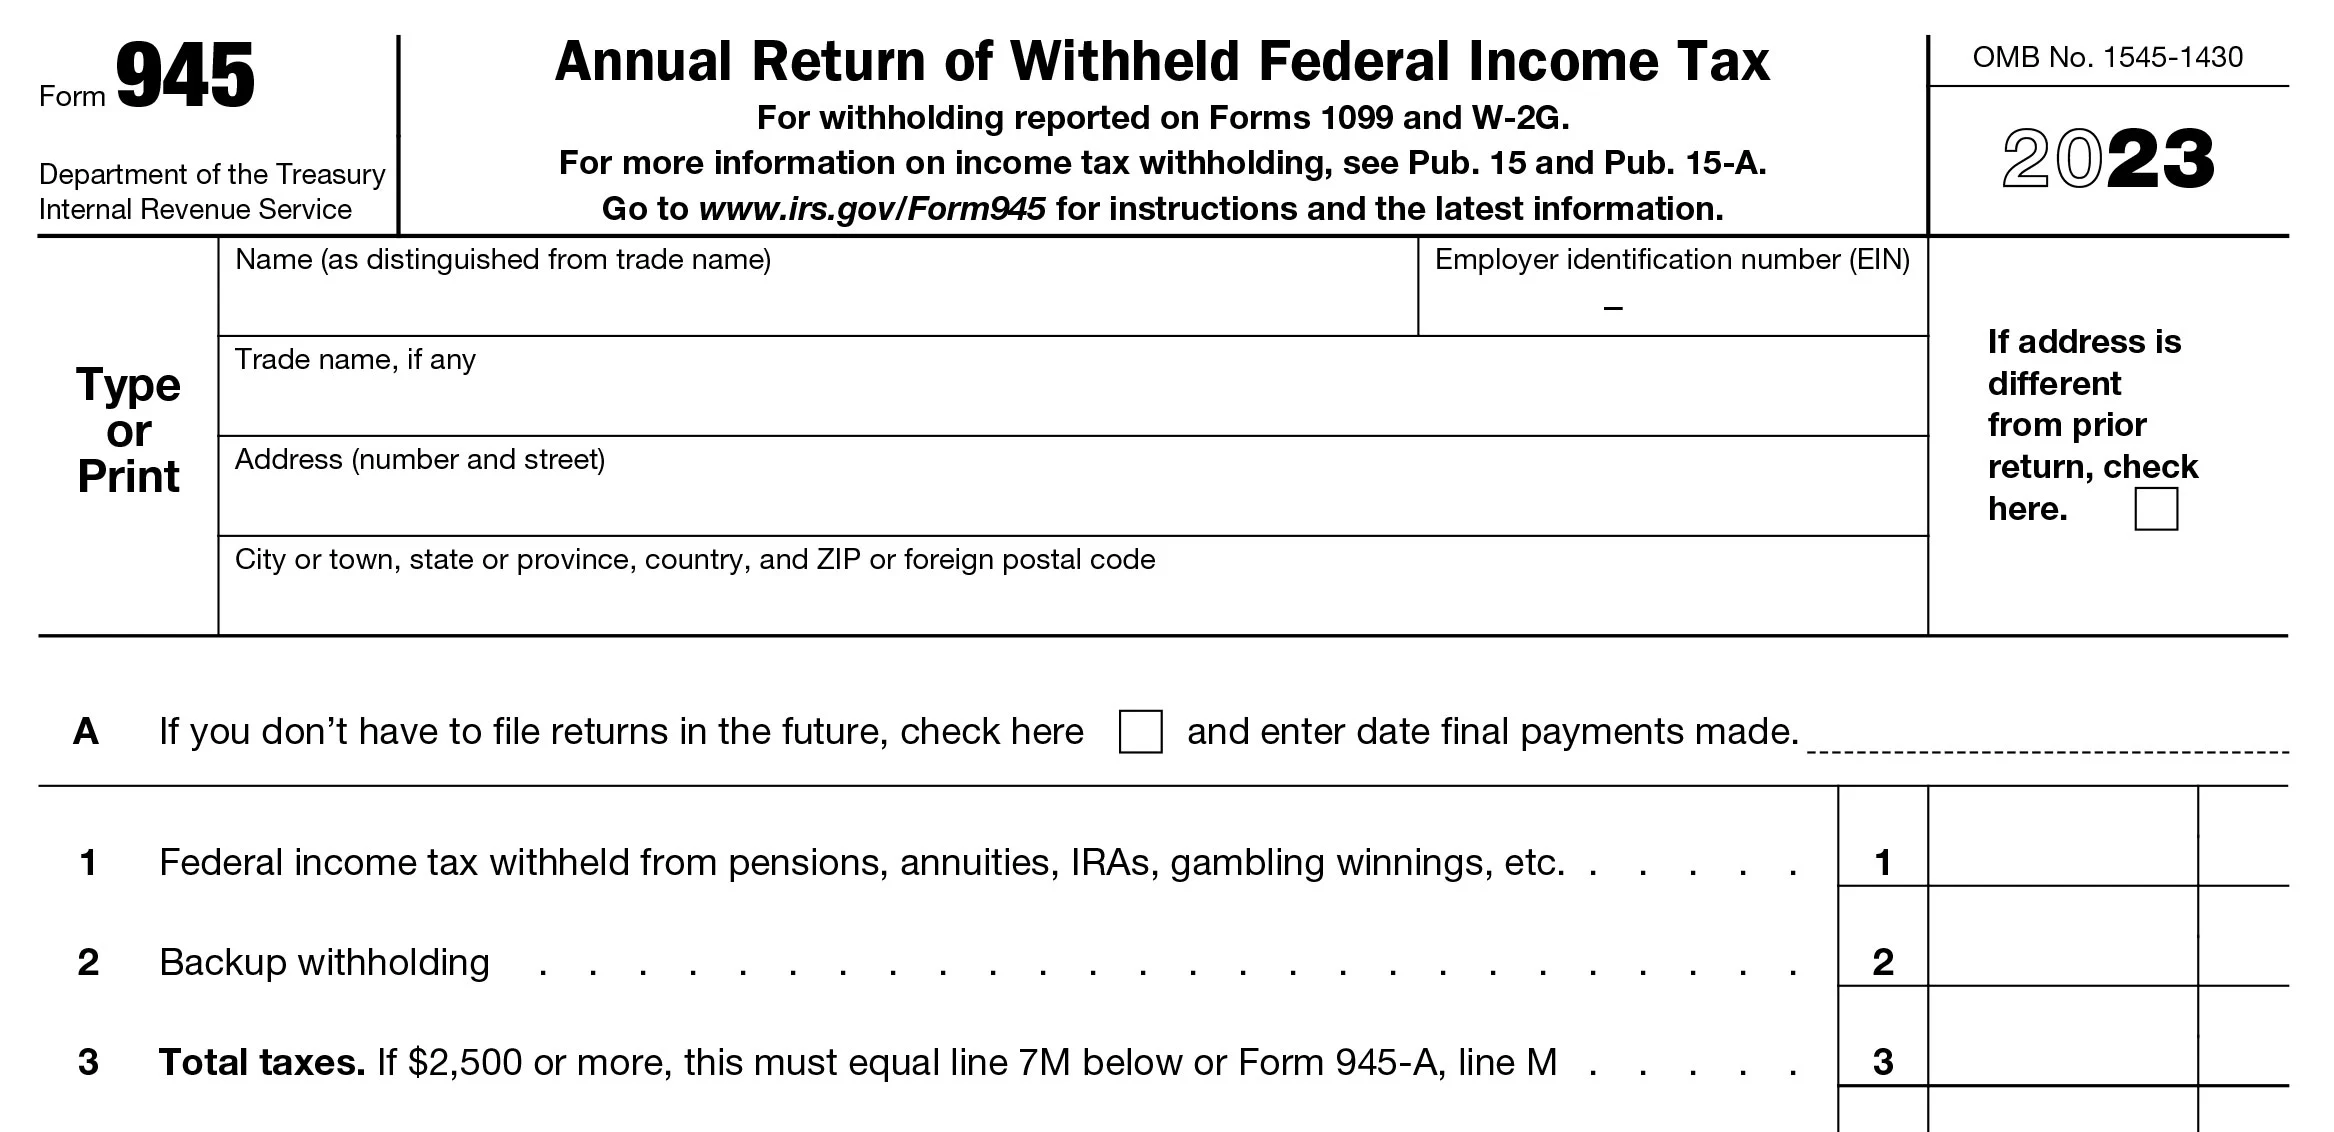 New Form 941 for 2021